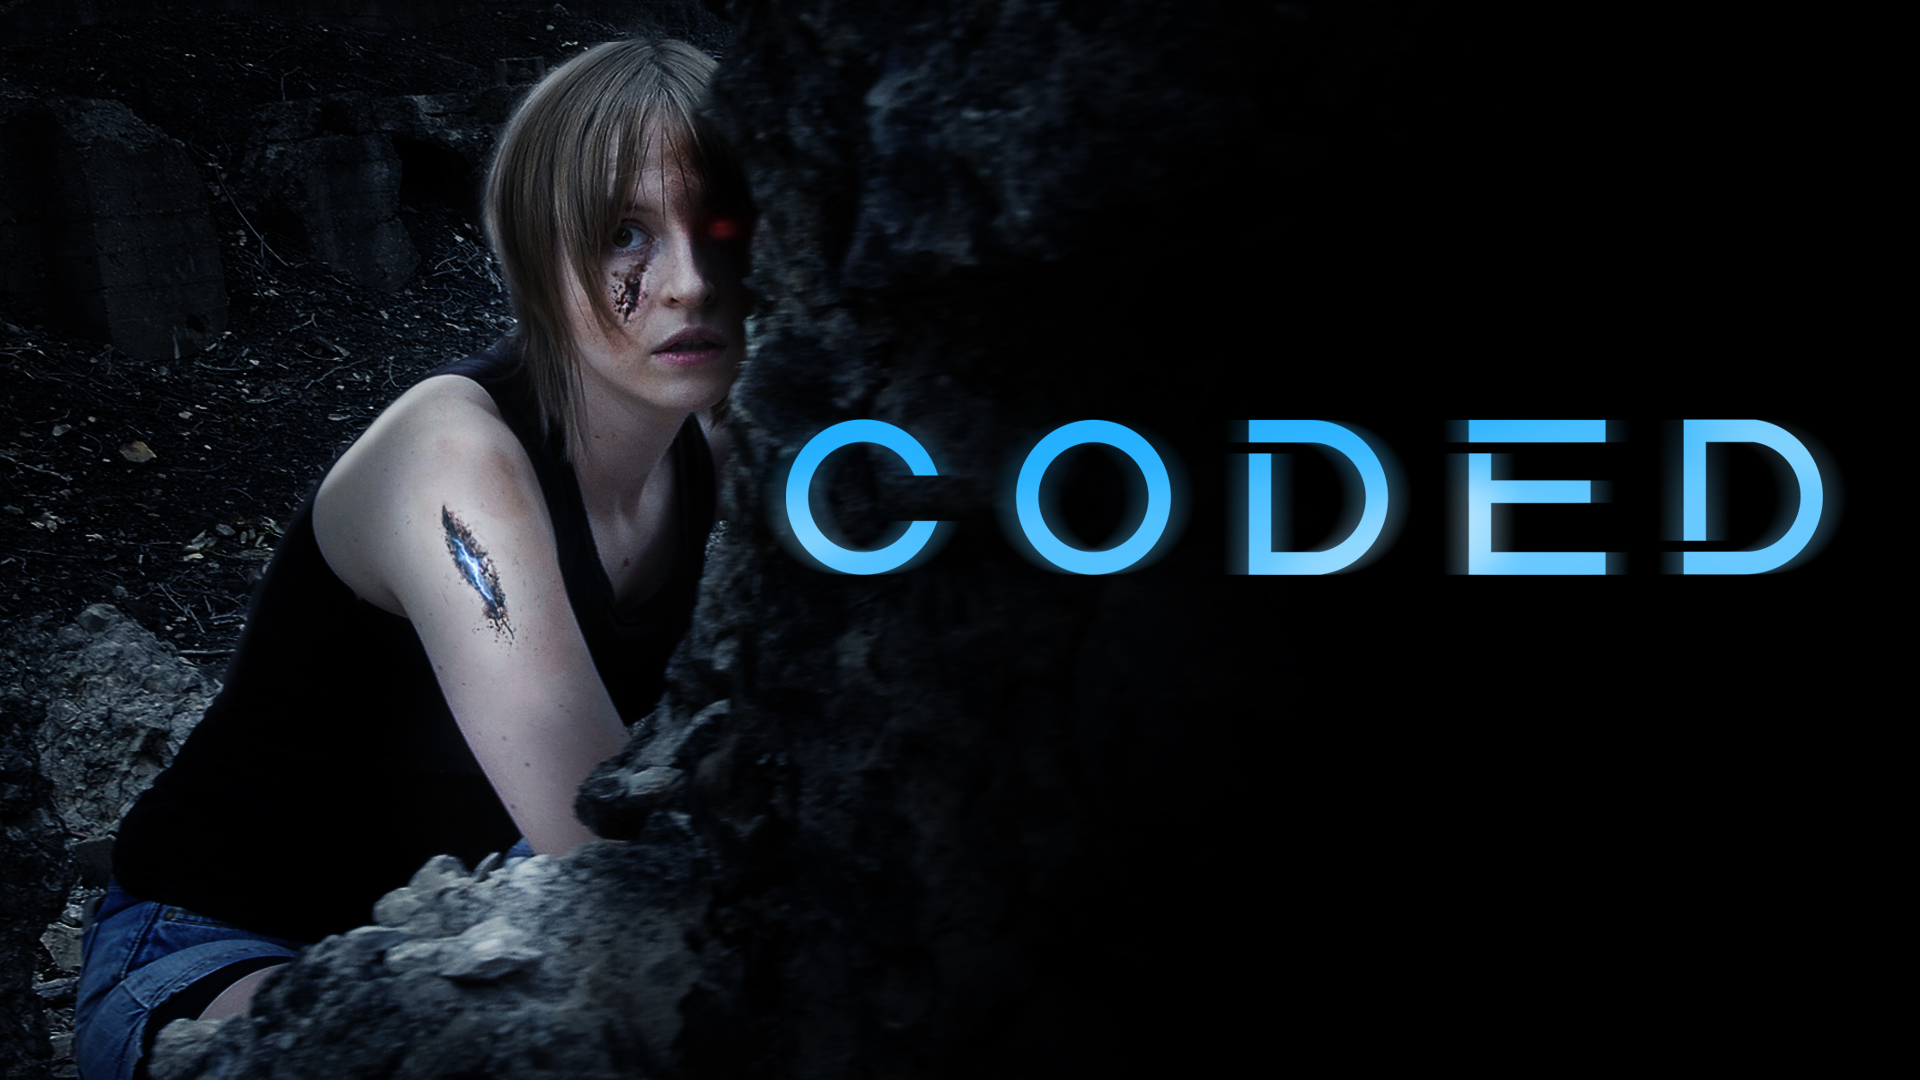 Coded Directed By Jose Salazar